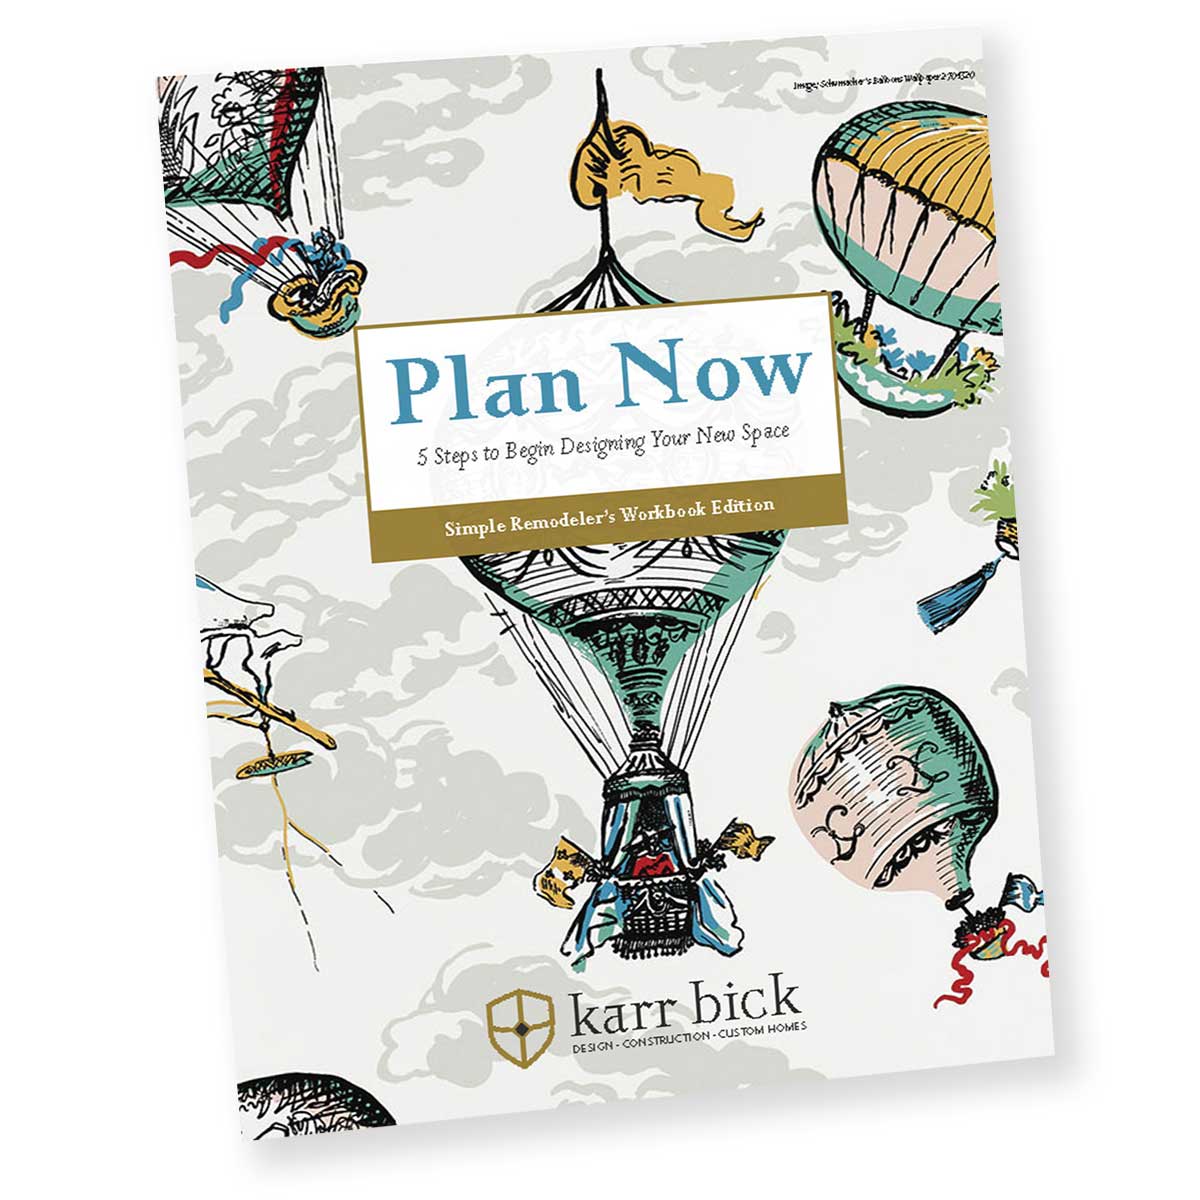 karr-bick-Plan-Now-cover